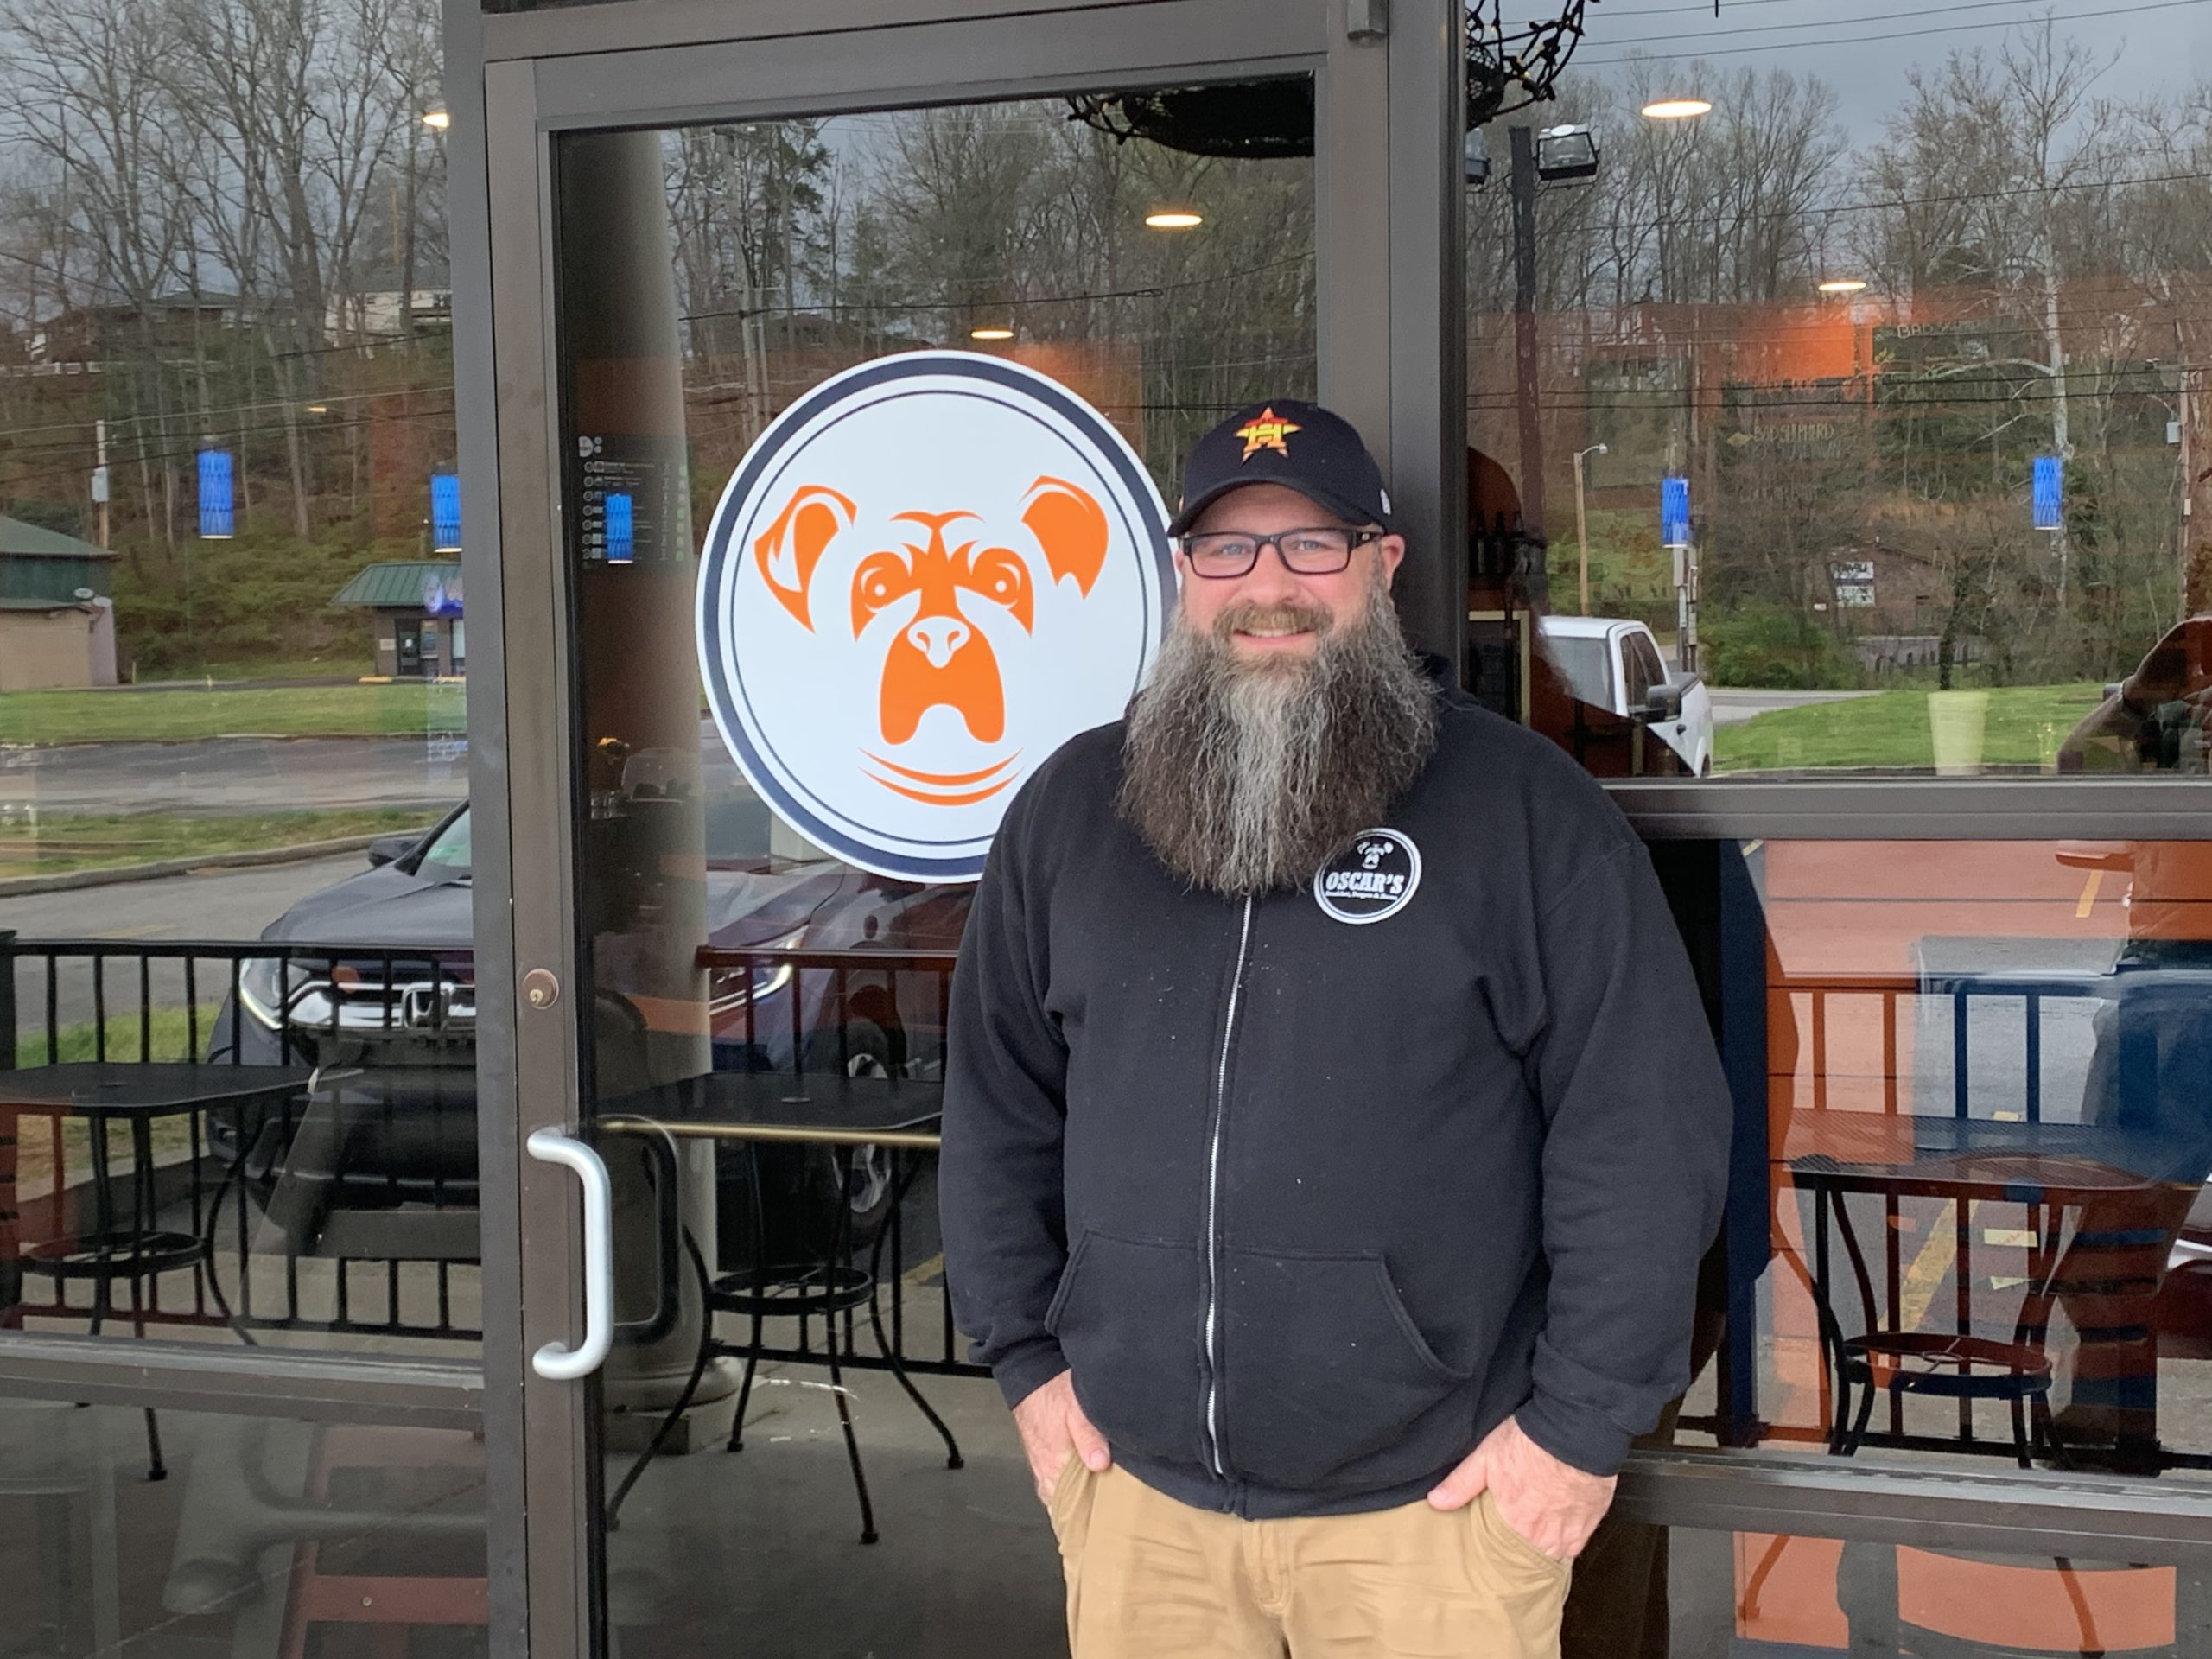 Jason Beter, owner of Oscar’s Breakfast, Burgers & Brews, outside of his restaurant. Oscar’s has been one of the many Cabell County restaurants that developed curbside and delivery orders to meet the needs of their customers while protecting the health of their employees and customers.